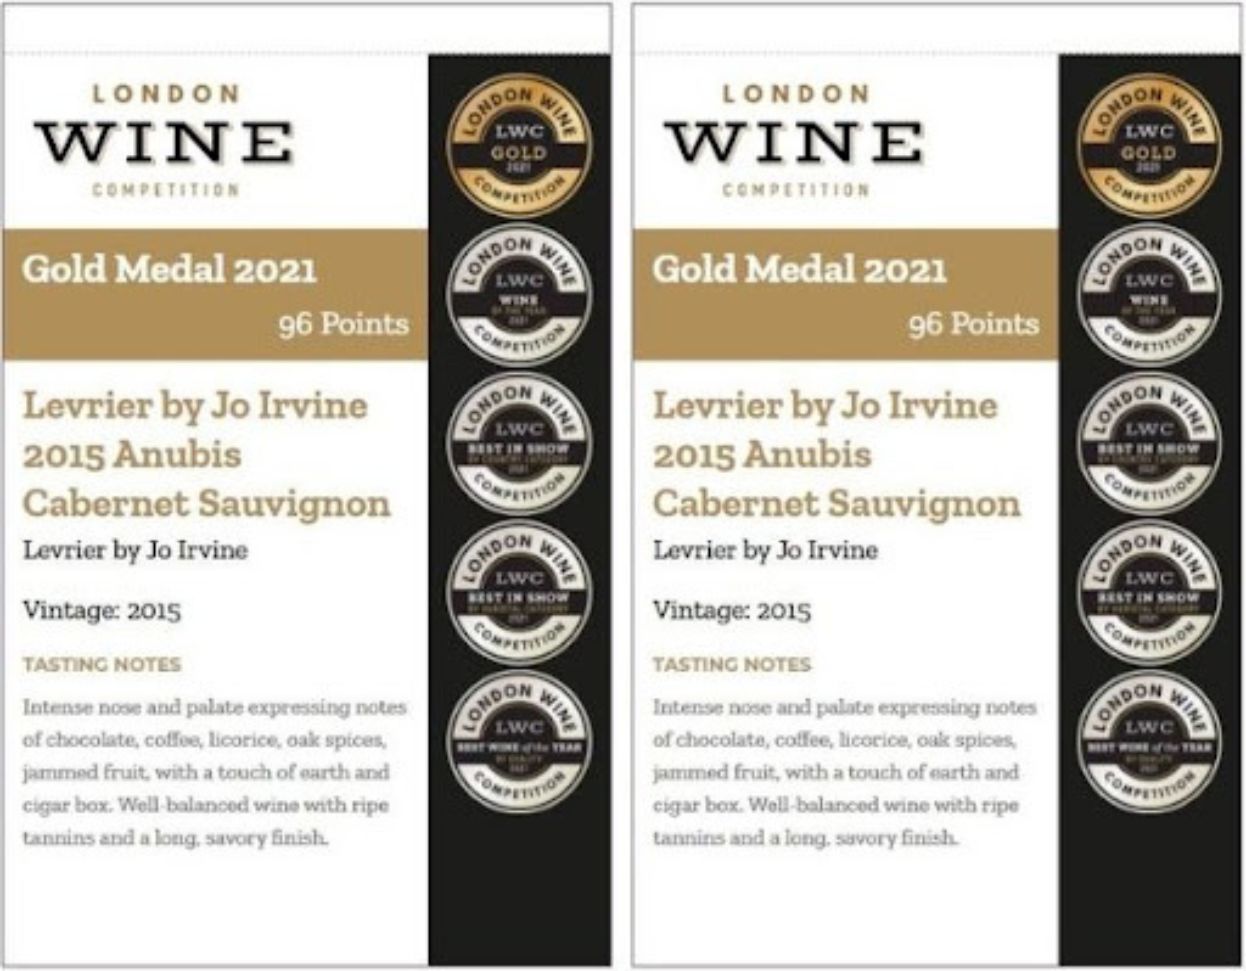 Winners can download digital medals and order medal stickers for their wine bottles